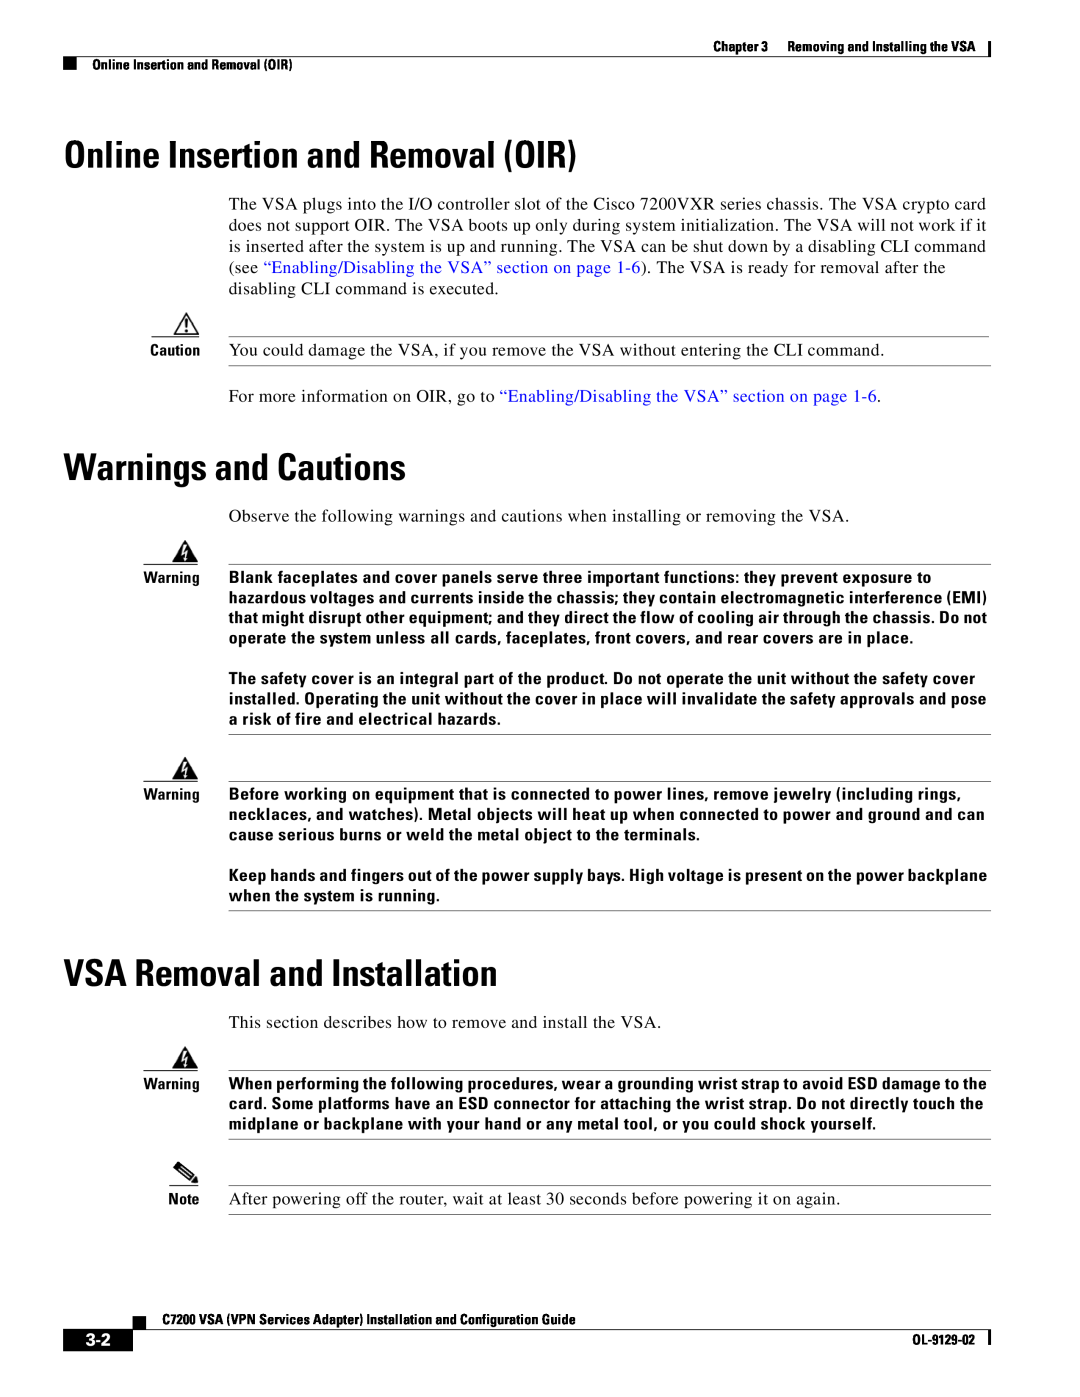 Cisco Systems C7200 manual Warnings and Cautions, VSA Removal and Installation, Online Insertion and Removal OIR 